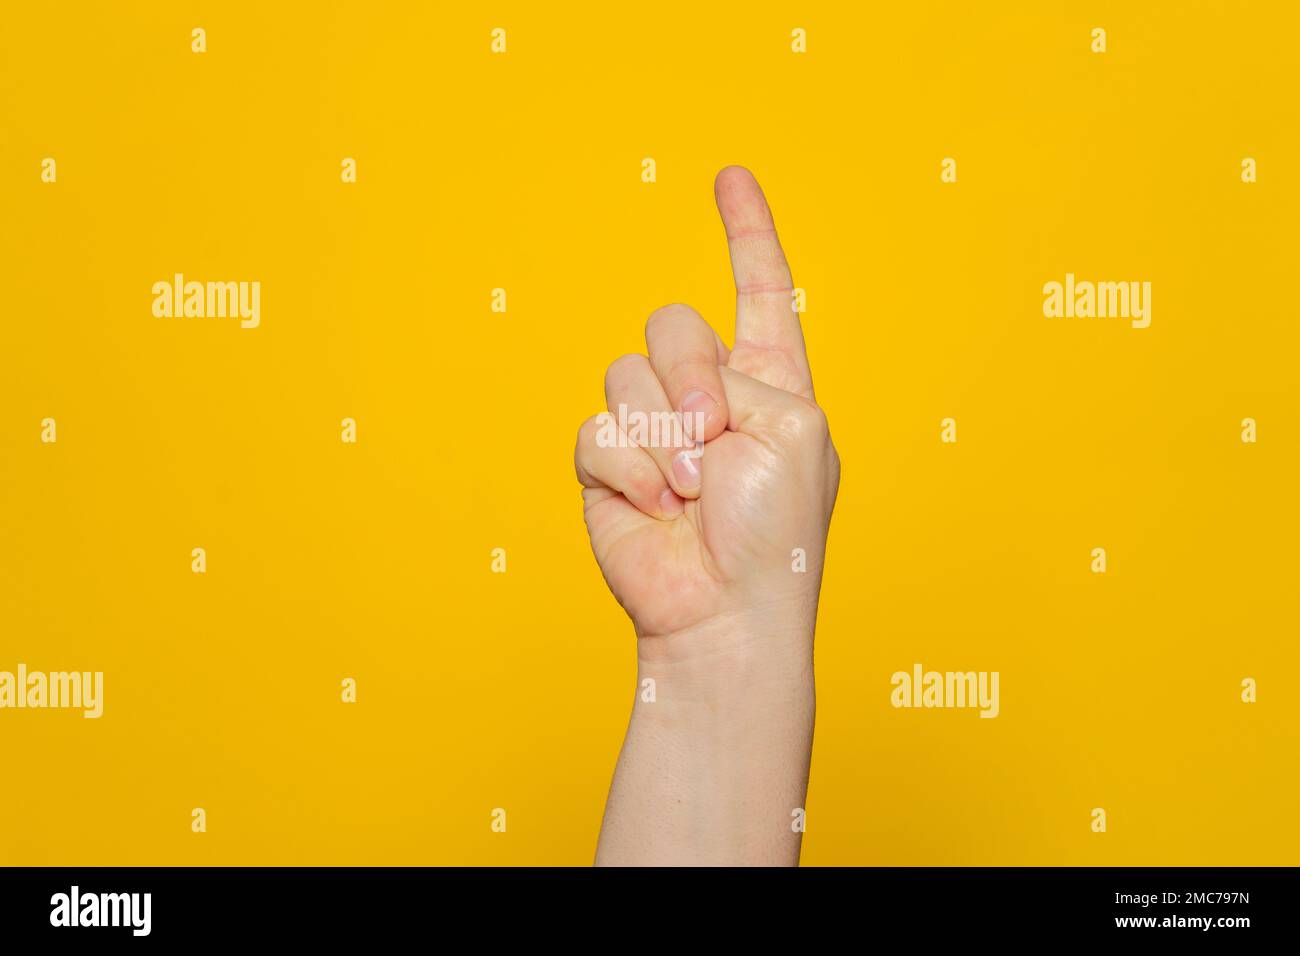 Hand shows index finger isolated on orange background, with clipping path, concept press the button first, double click the mouse, take the elevator. Stock Photo